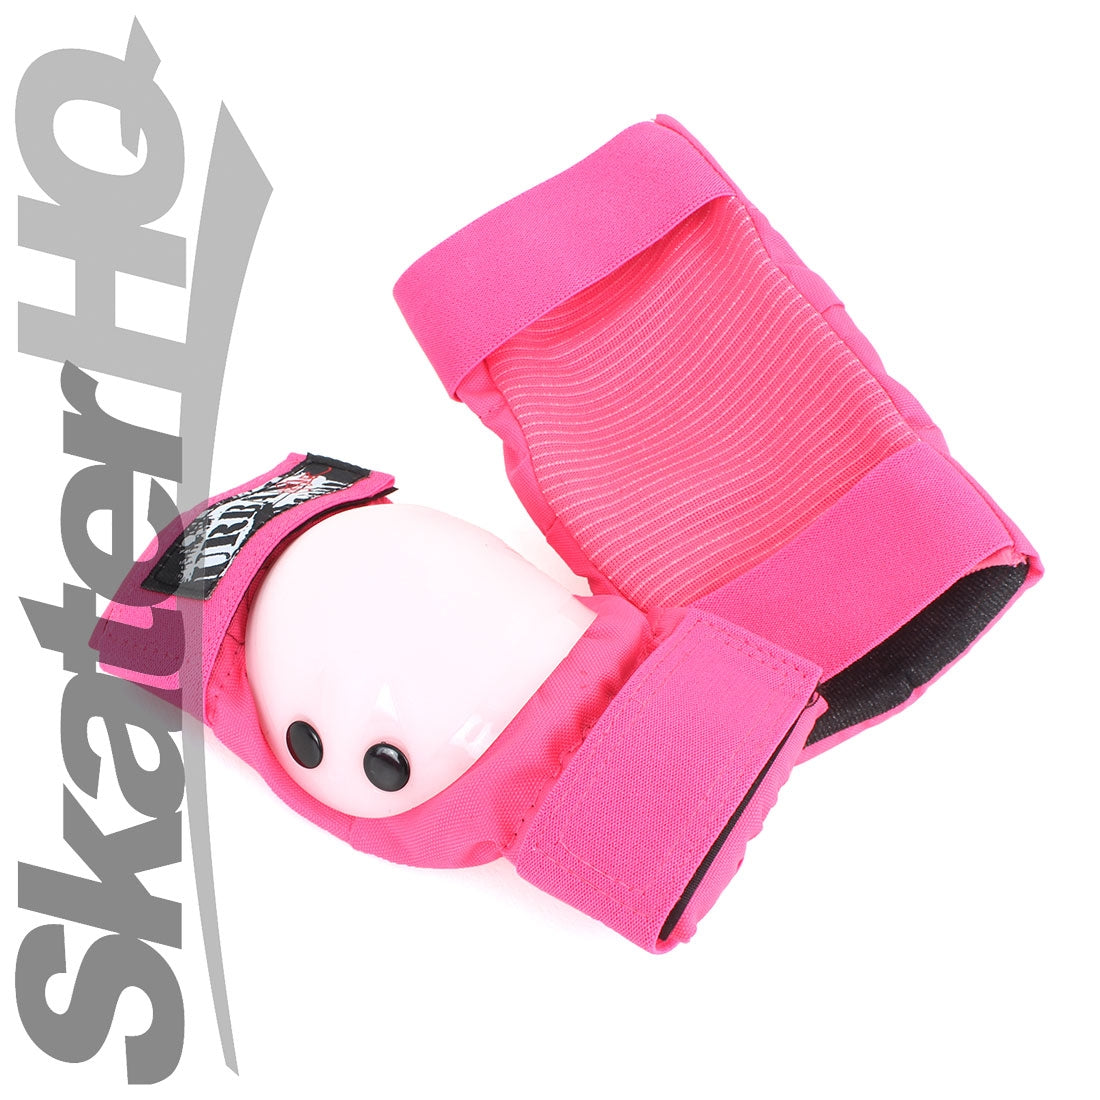 Urban Skater Tri Pack Pink - Large Protective Gear